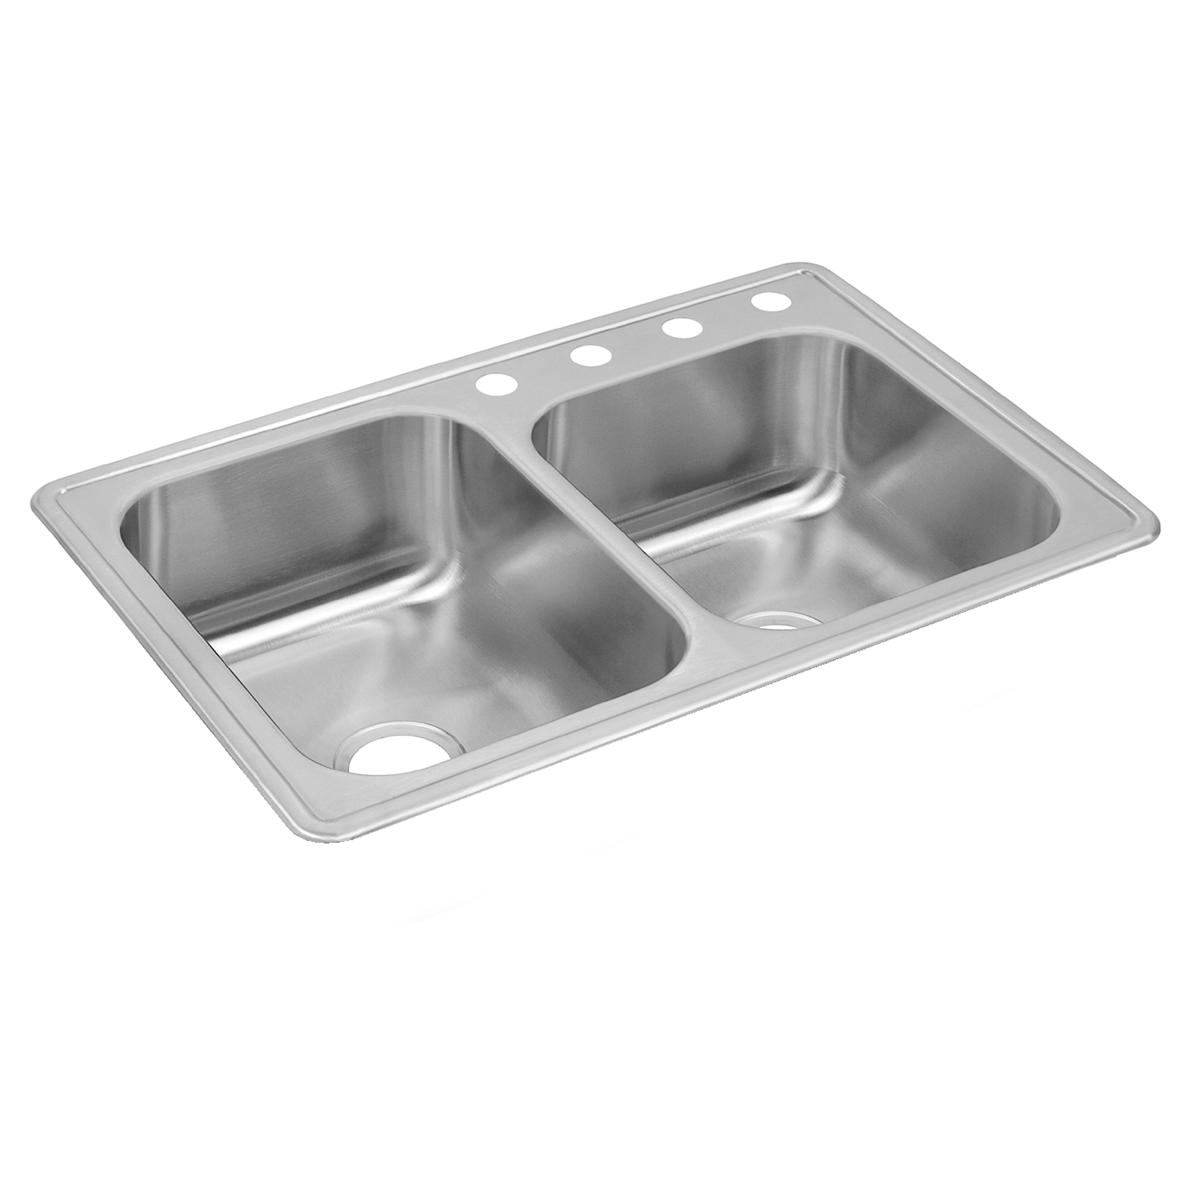 satin offset double bowl drop-in sink